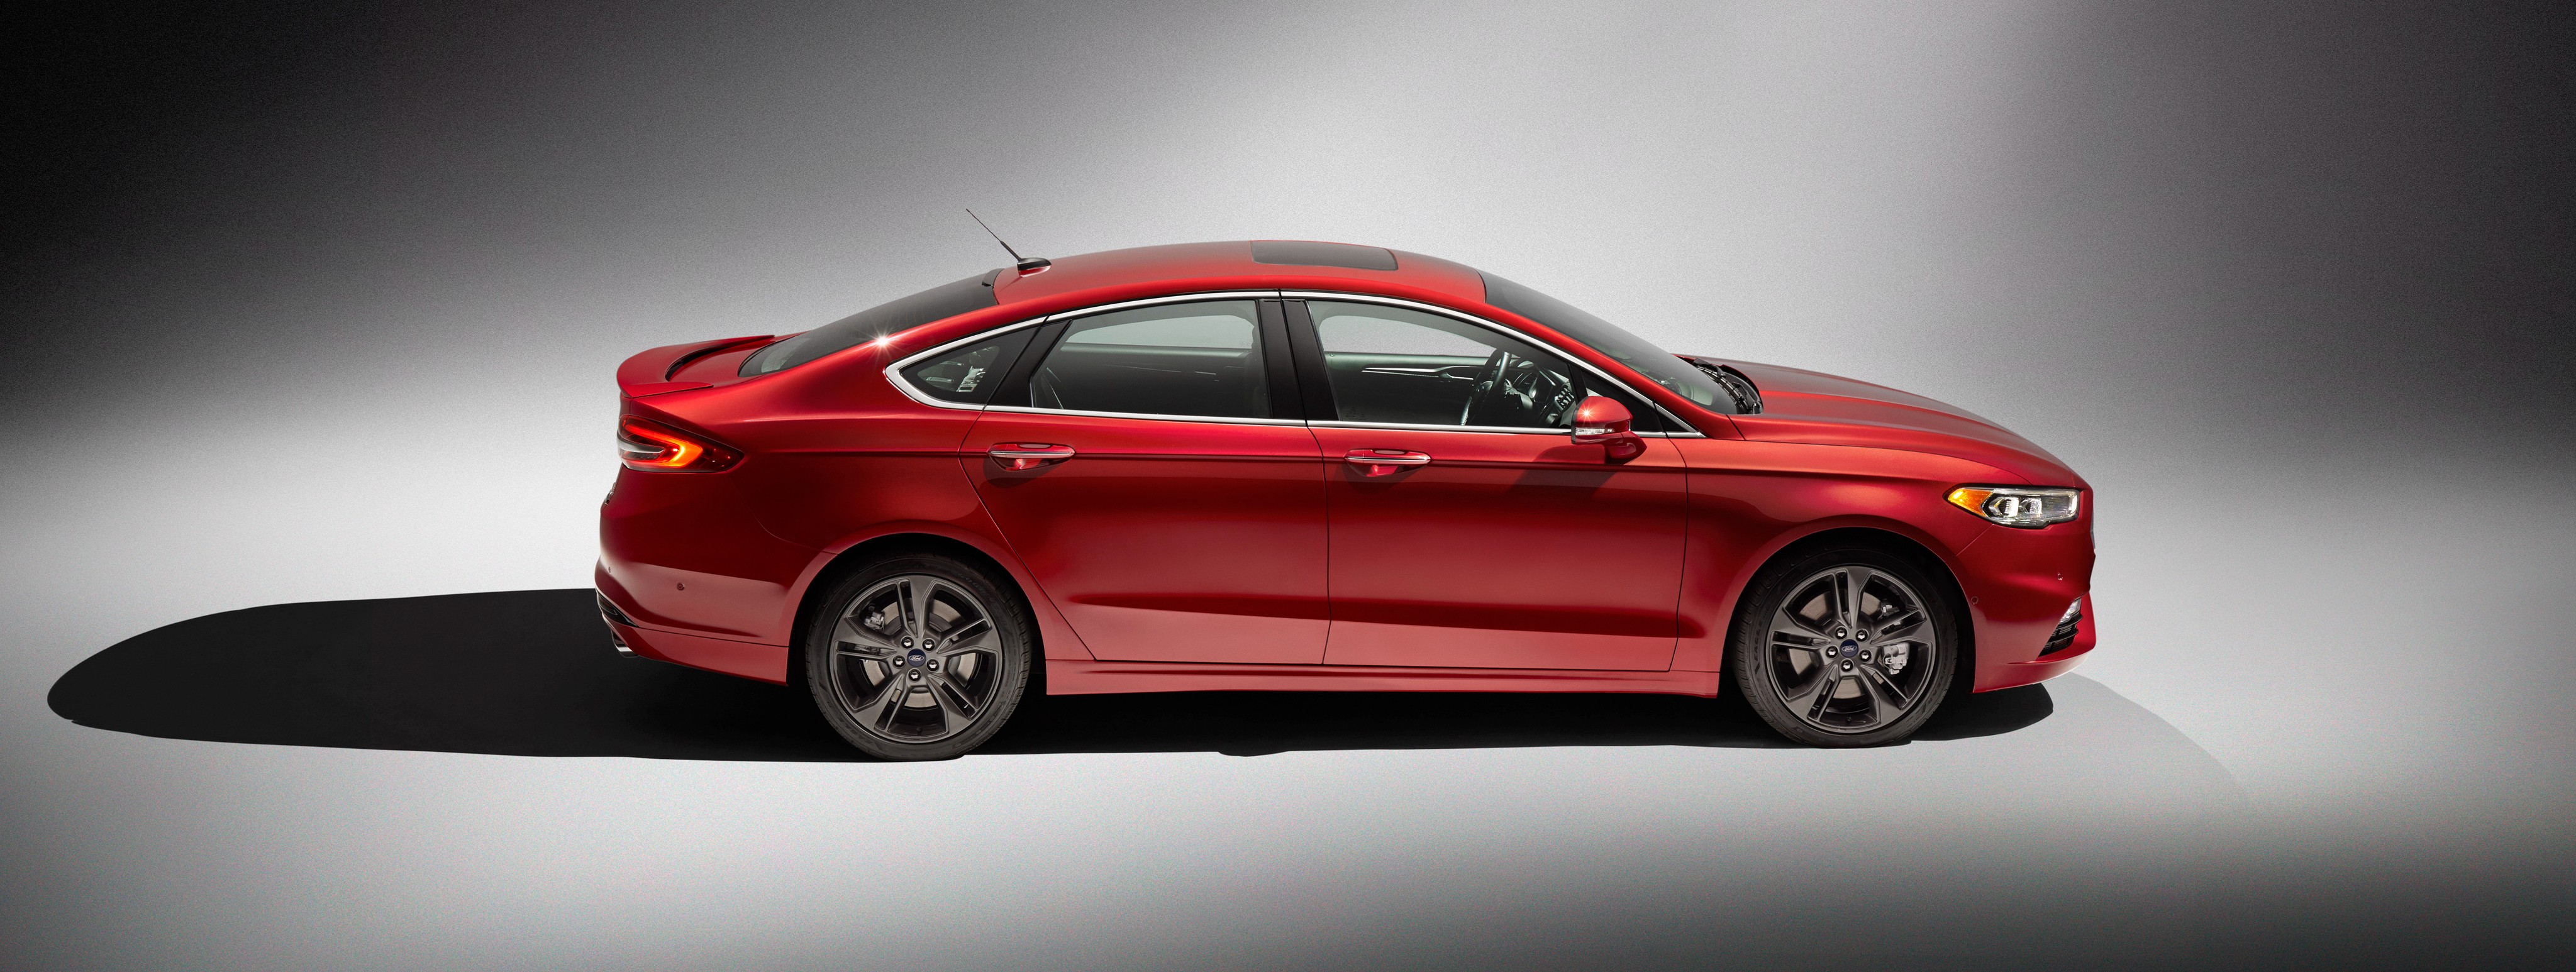 2020 Ford Fusion Redesign Cancelled, Declining Sales Are To Blame -  autoevolution